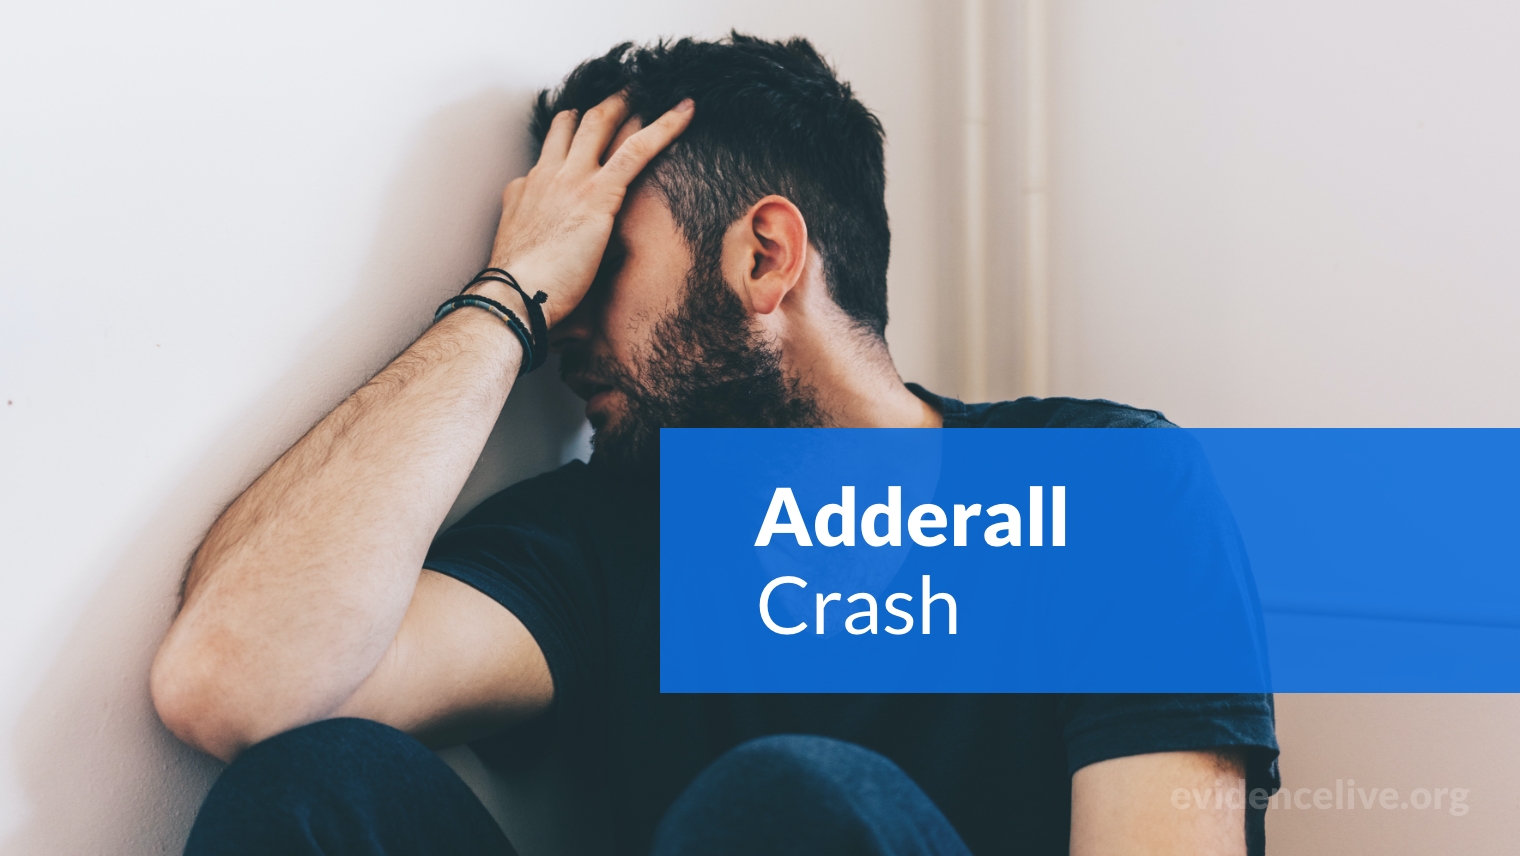 Adderall Crash: How To Cope With The Comedown